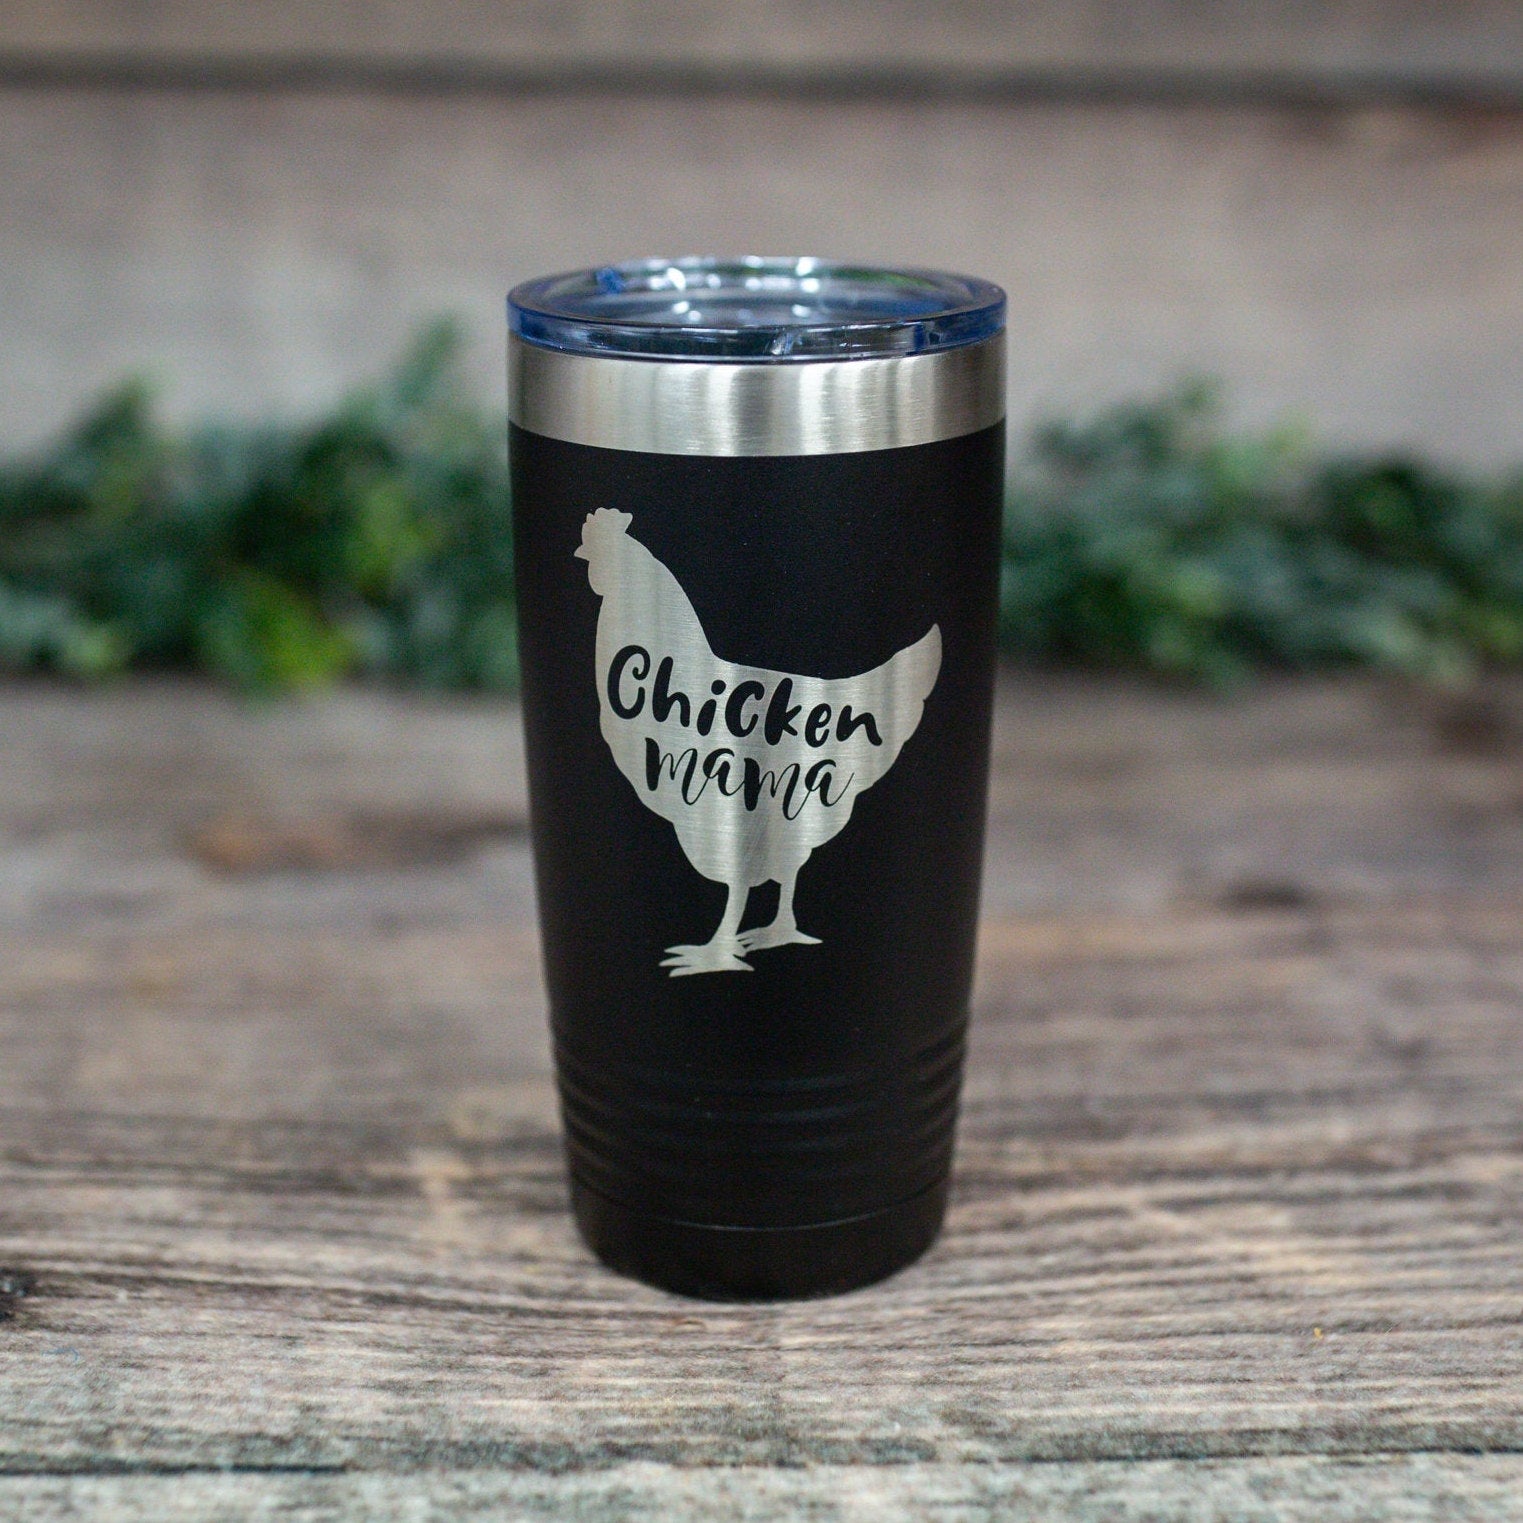 https://3cetching.com/wp-content/uploads/2021/07/chicken-mama-engraved-stainless-steel-tumbler-funny-adult-humor-gift-farm-humor-tumbler-60f743cf.jpg